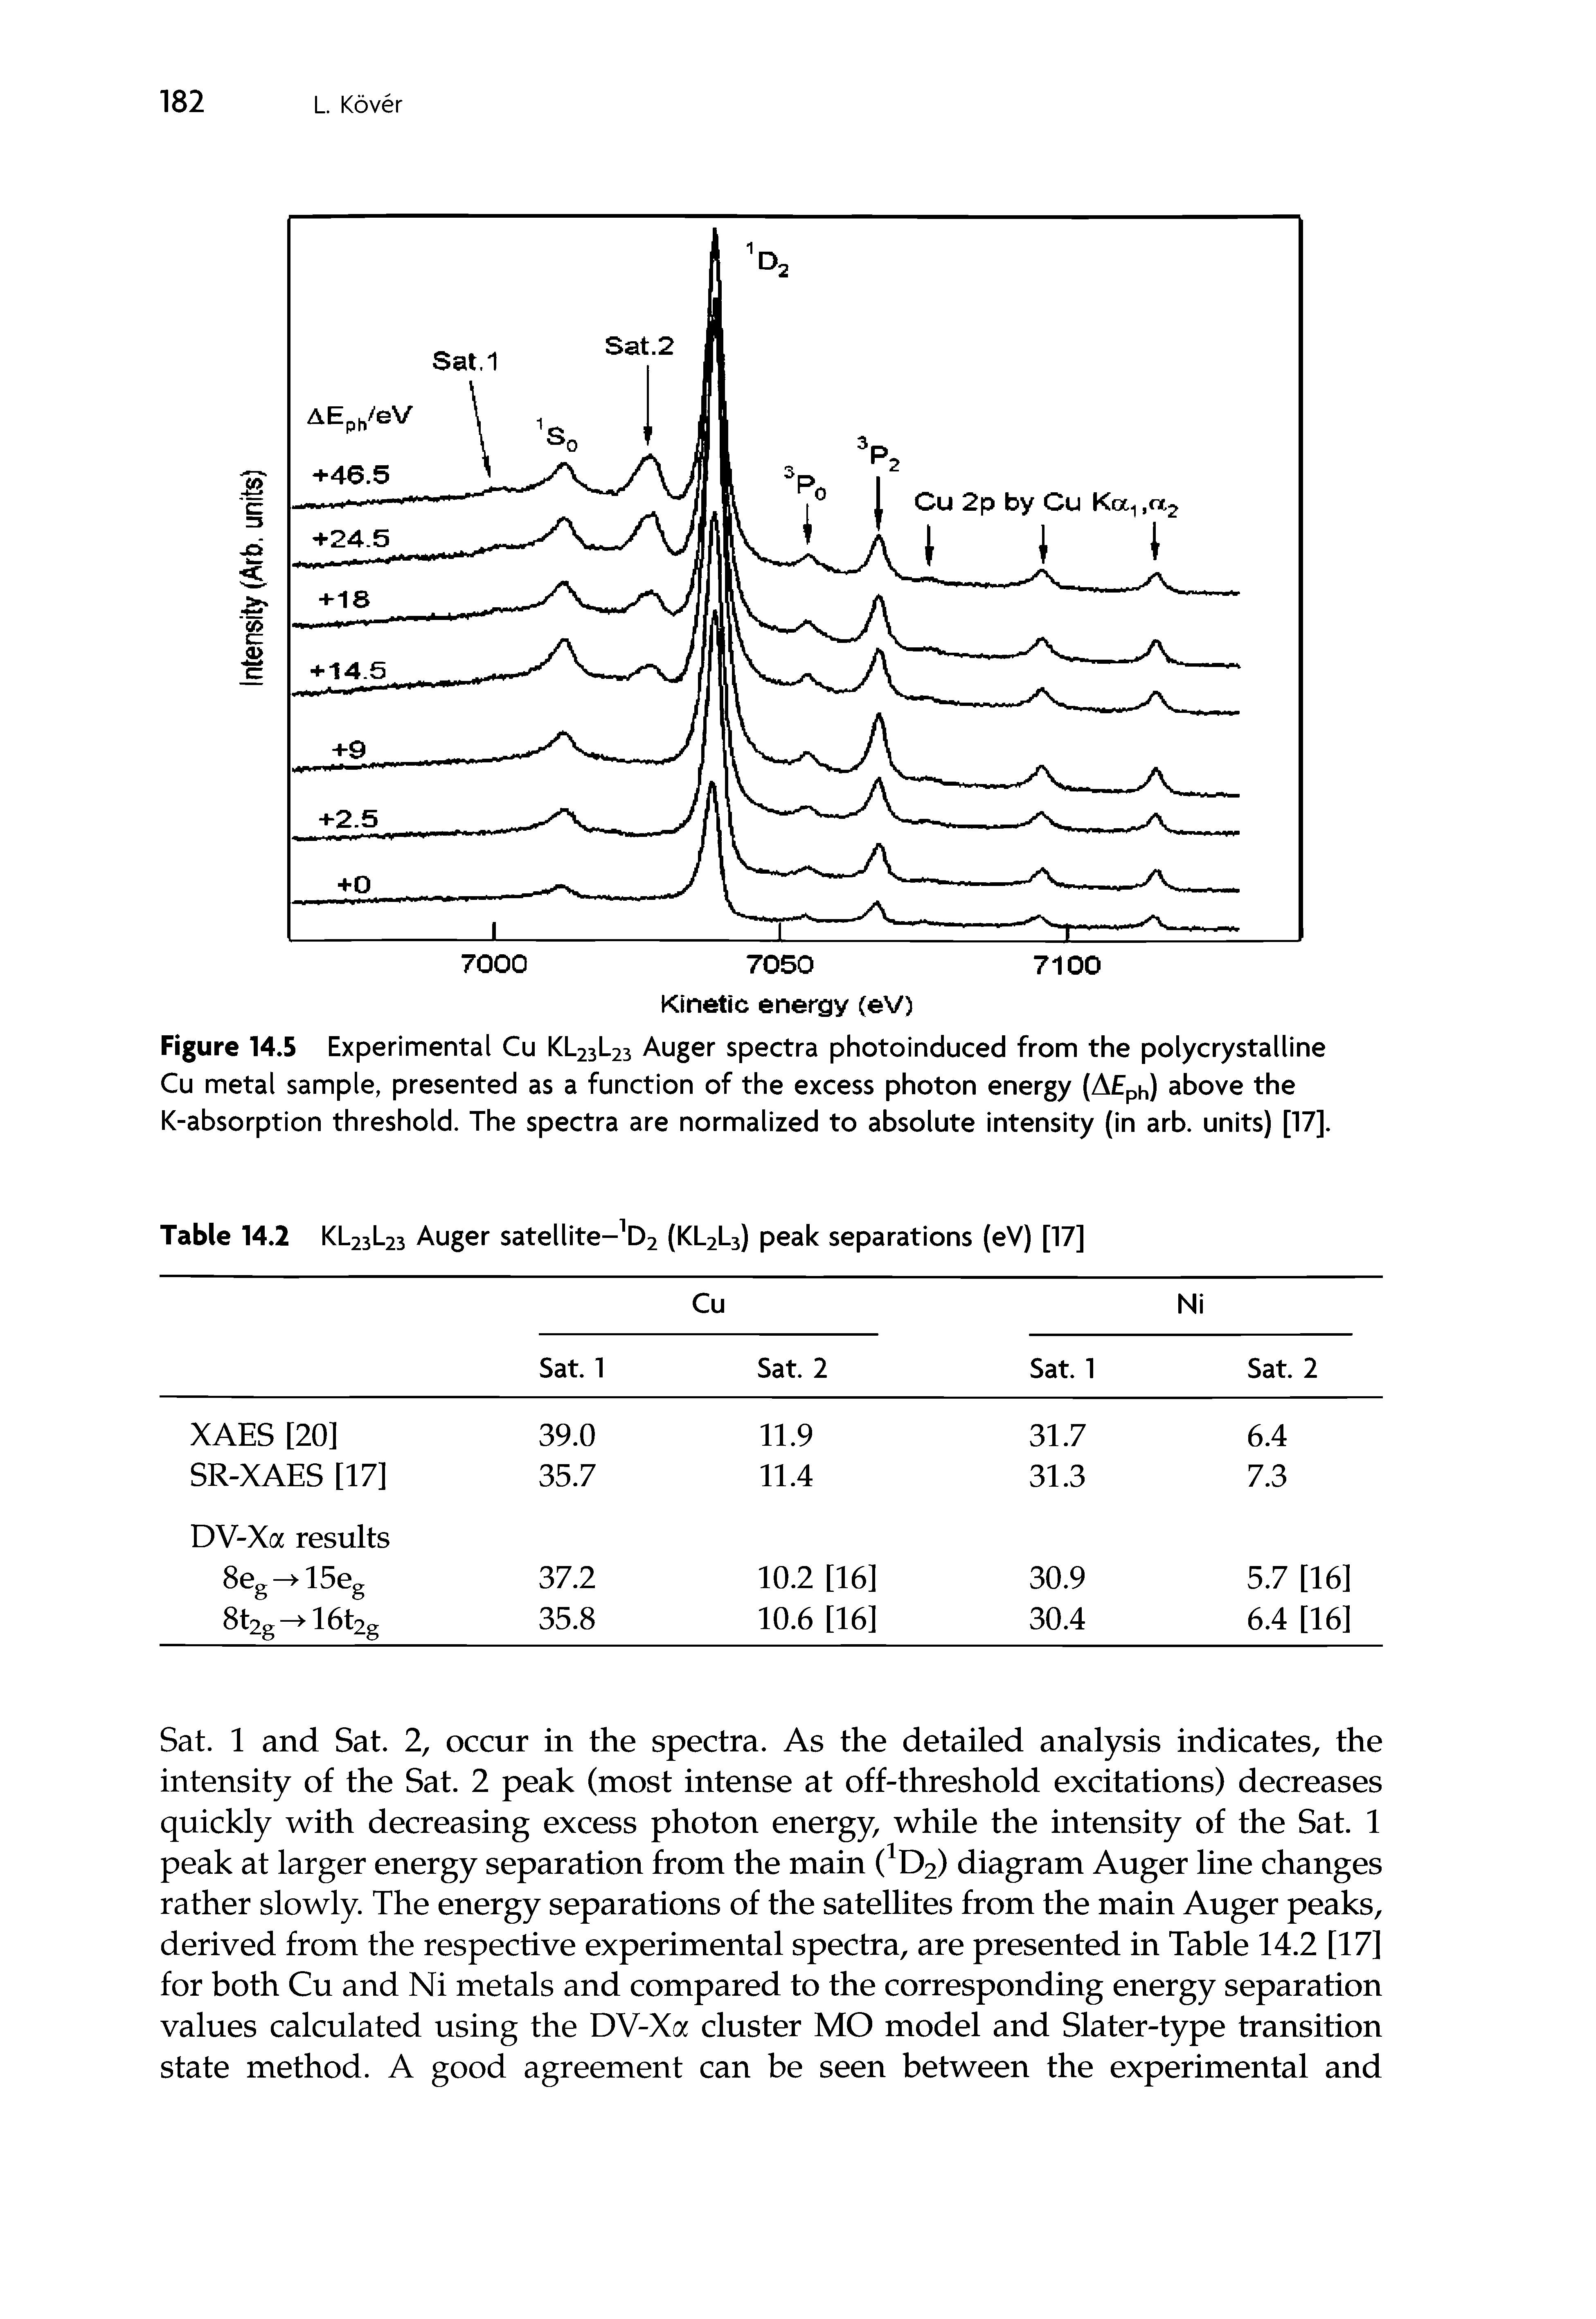 Figure 14.5 Experimental Cu KL23L23 Auger spectra photoinduced from the polycrystalline Cu metal sample, presented as a function of the excess photon energy (AEph) above the K-absorption threshold. The spectra are normalized to absolute intensity (in arb. units) [17].